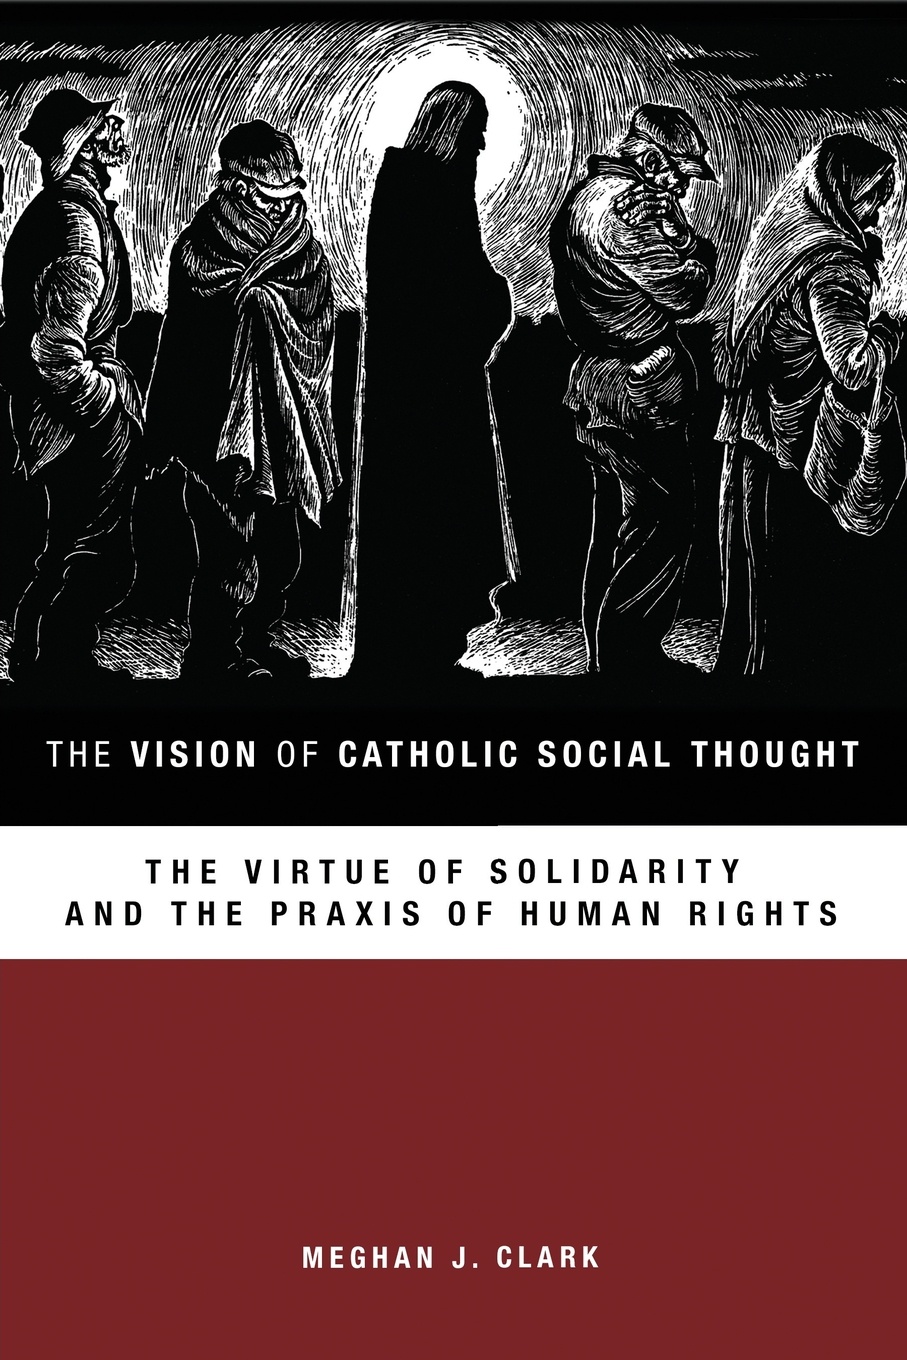 The Vision of Catholic Social Thought. The Virtue of Solidarity and the Praxis of Human Rights